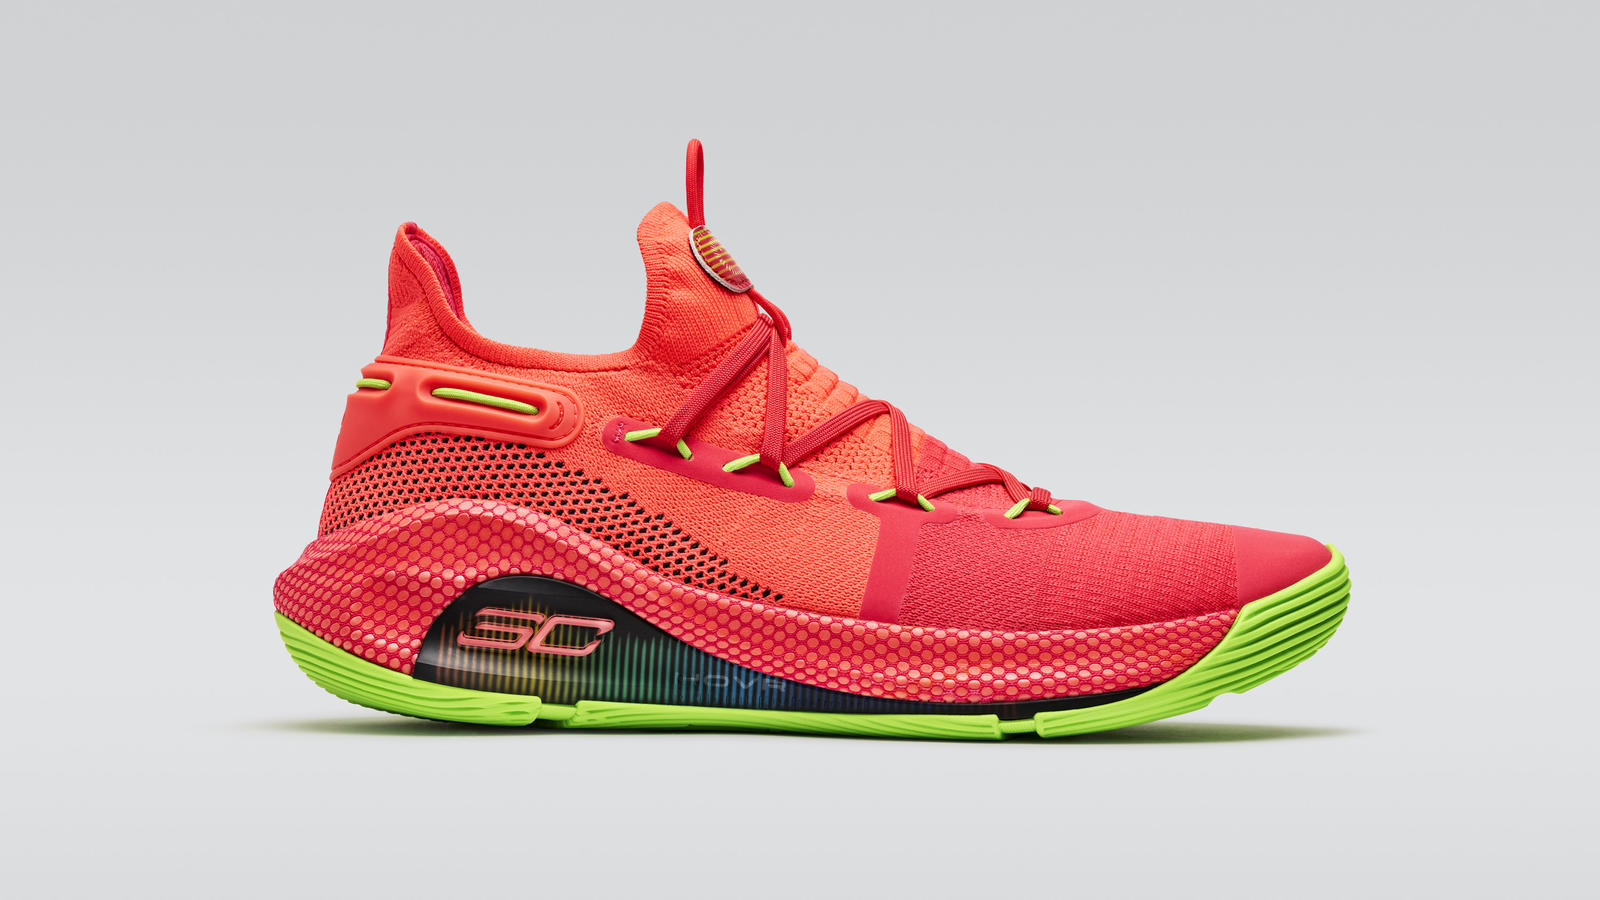 Steph Curry's new sneakers drop today 